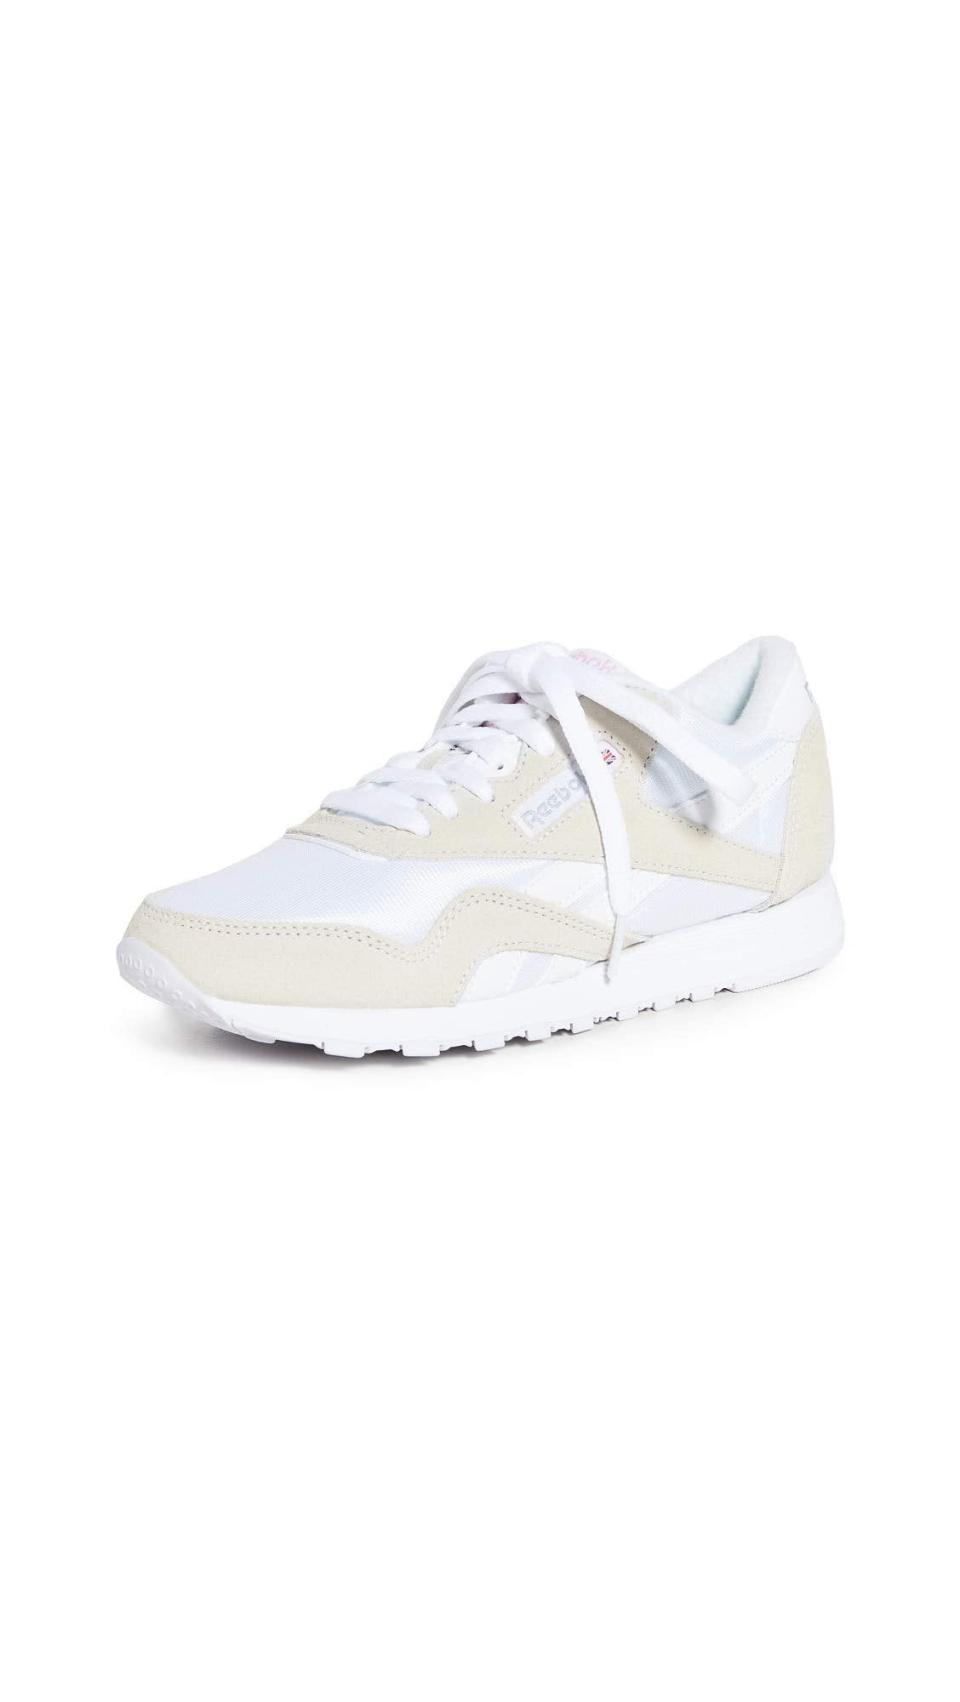 <h2>Savings on Reebok Sneakers<br></h2><br>Nab your very own pair of dad shoes for up to 40% off during Prime Day with an excellent selection of throwback styles from Reebok.<br><br><em>Shop Reebok at <strong><span>Amazon</span></strong></em><br><br><strong>Reebok</strong> Classic Nylon Sneaker, $, available at <a href="https://amzn.to/3zN9Qvi" rel="nofollow noopener" target="_blank" data-ylk="slk:Amazon" class="link ">Amazon</a>